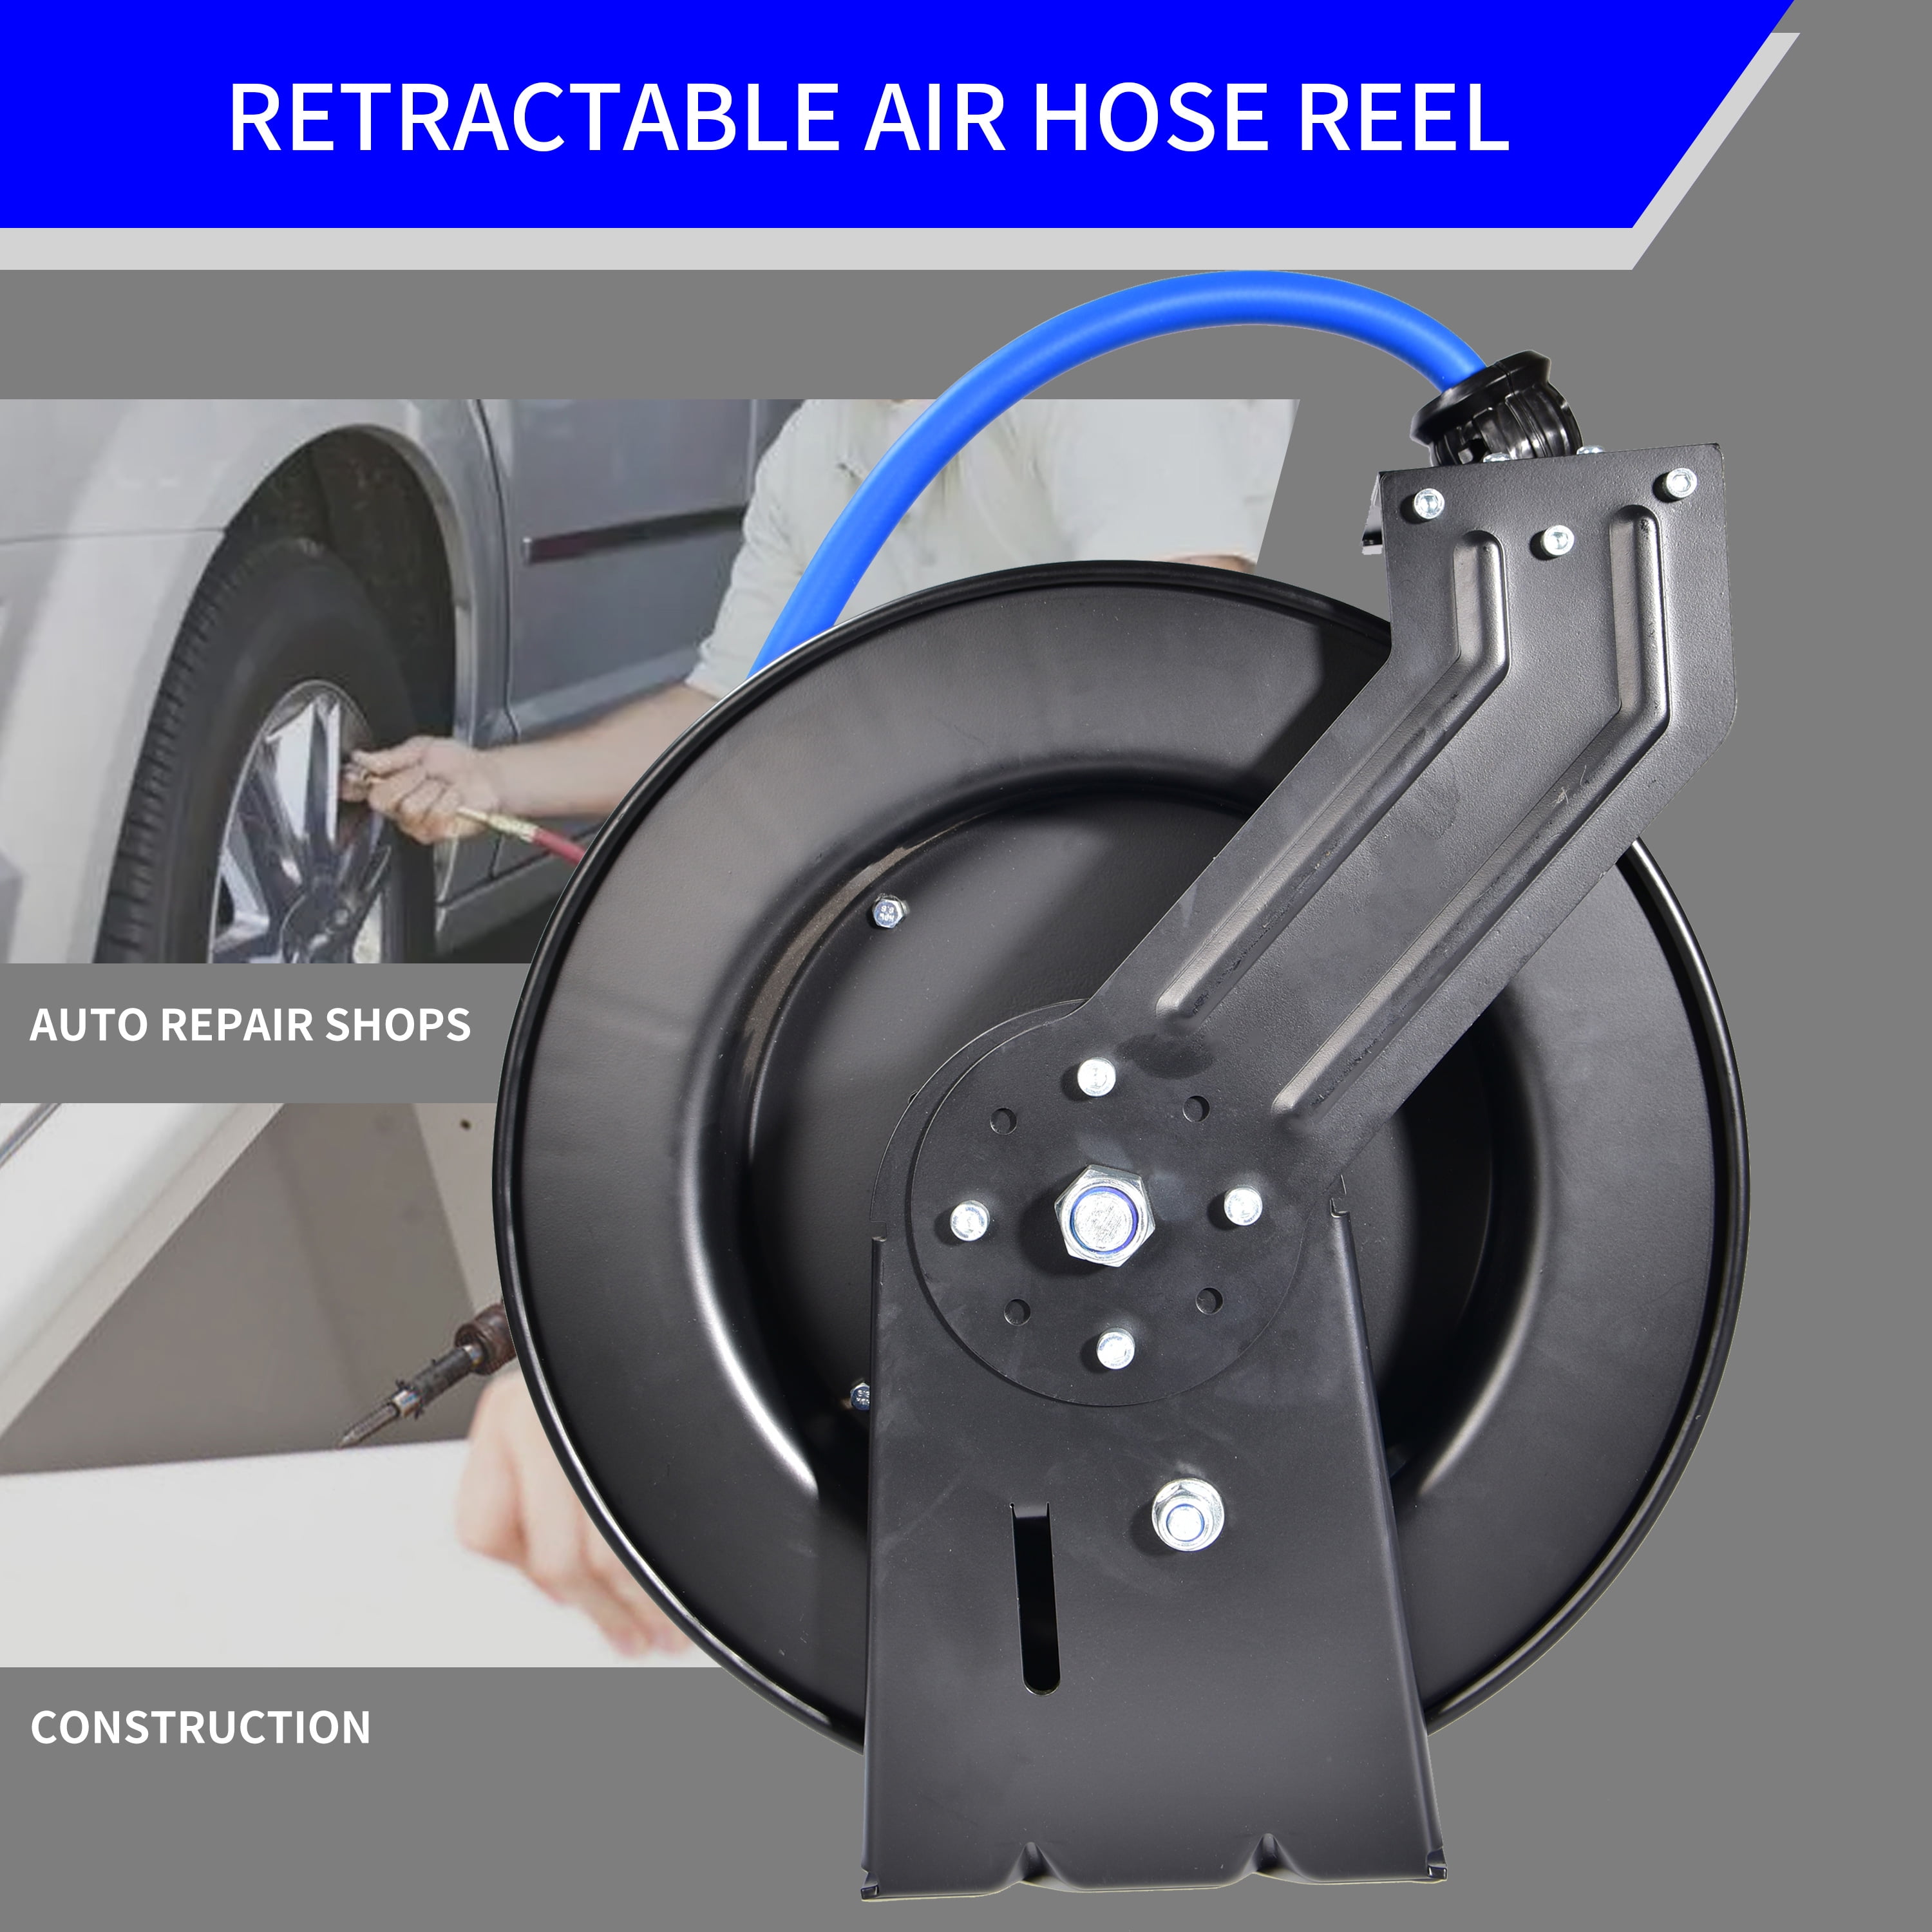 Txecpro Retractable Wall-Mount Air Hose Reel with 50ft Hybrid Hose and 180°  Swivel, 300 PSI Max Pressure for Garage/Workshop/Industrial Use - Northern  Tool